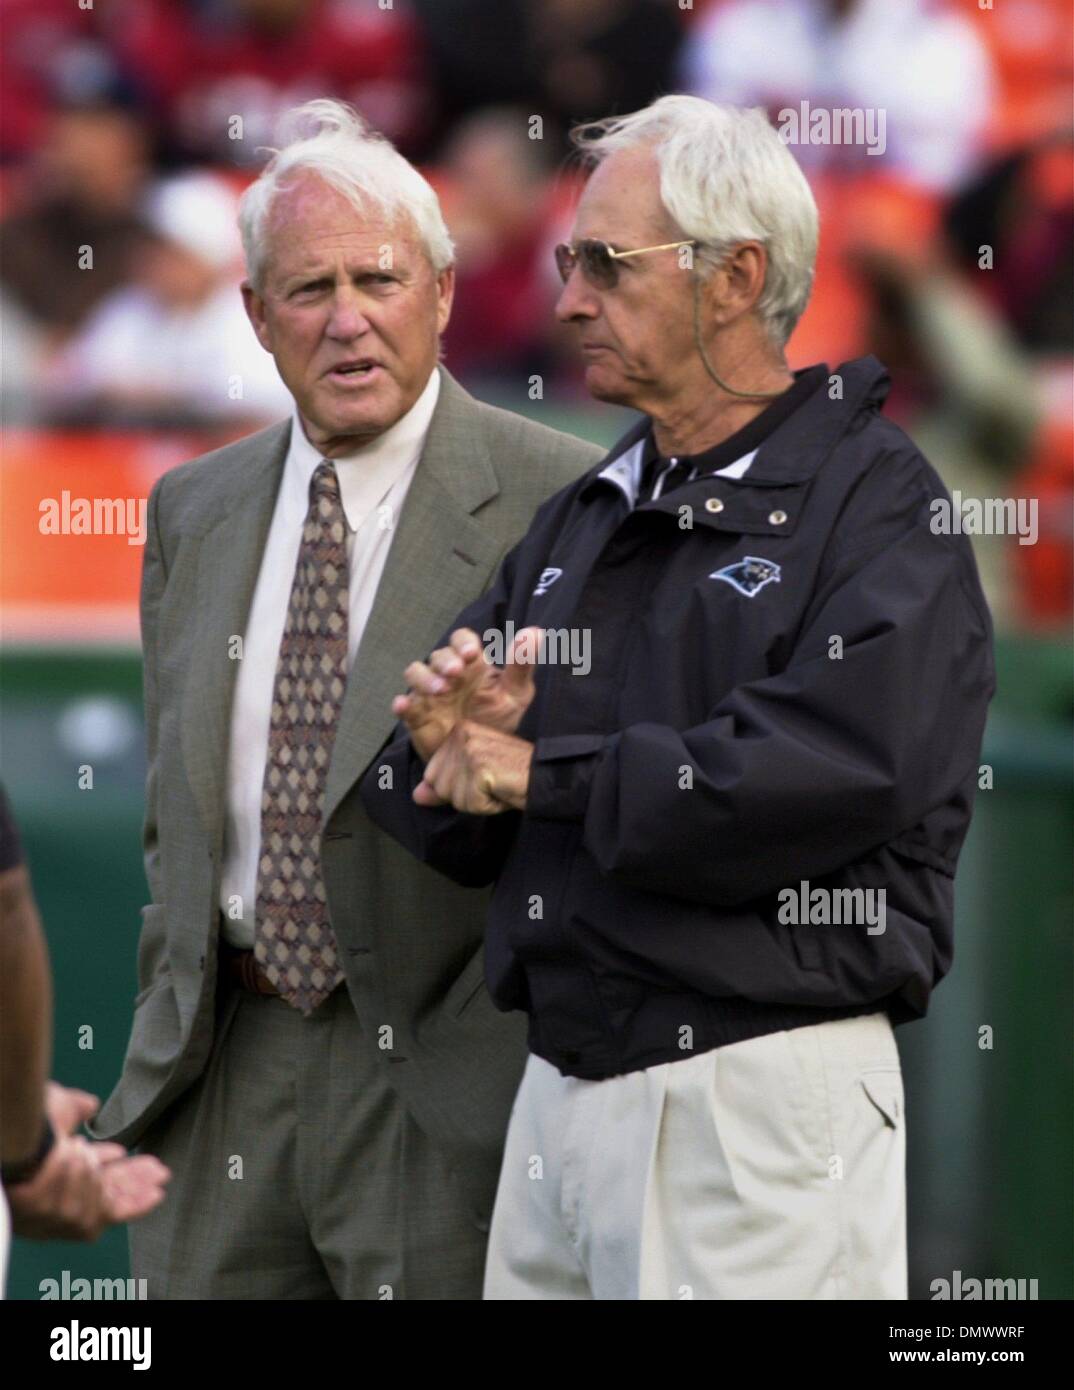 Oct 07, 2001 - San Francisco, California, USA - BILL WALSH, the inventor of the West Coast Offense, was one of the greatest football coaches of all time. Walsh, guided the San Francisco 49ers to three championships and six NFC West division titles in his 10 years as head coach, has died at the age of 75, following a long battle with leukemia. PICTURED: Bill Walsh and GEORGE SEIFERT Stock Photo